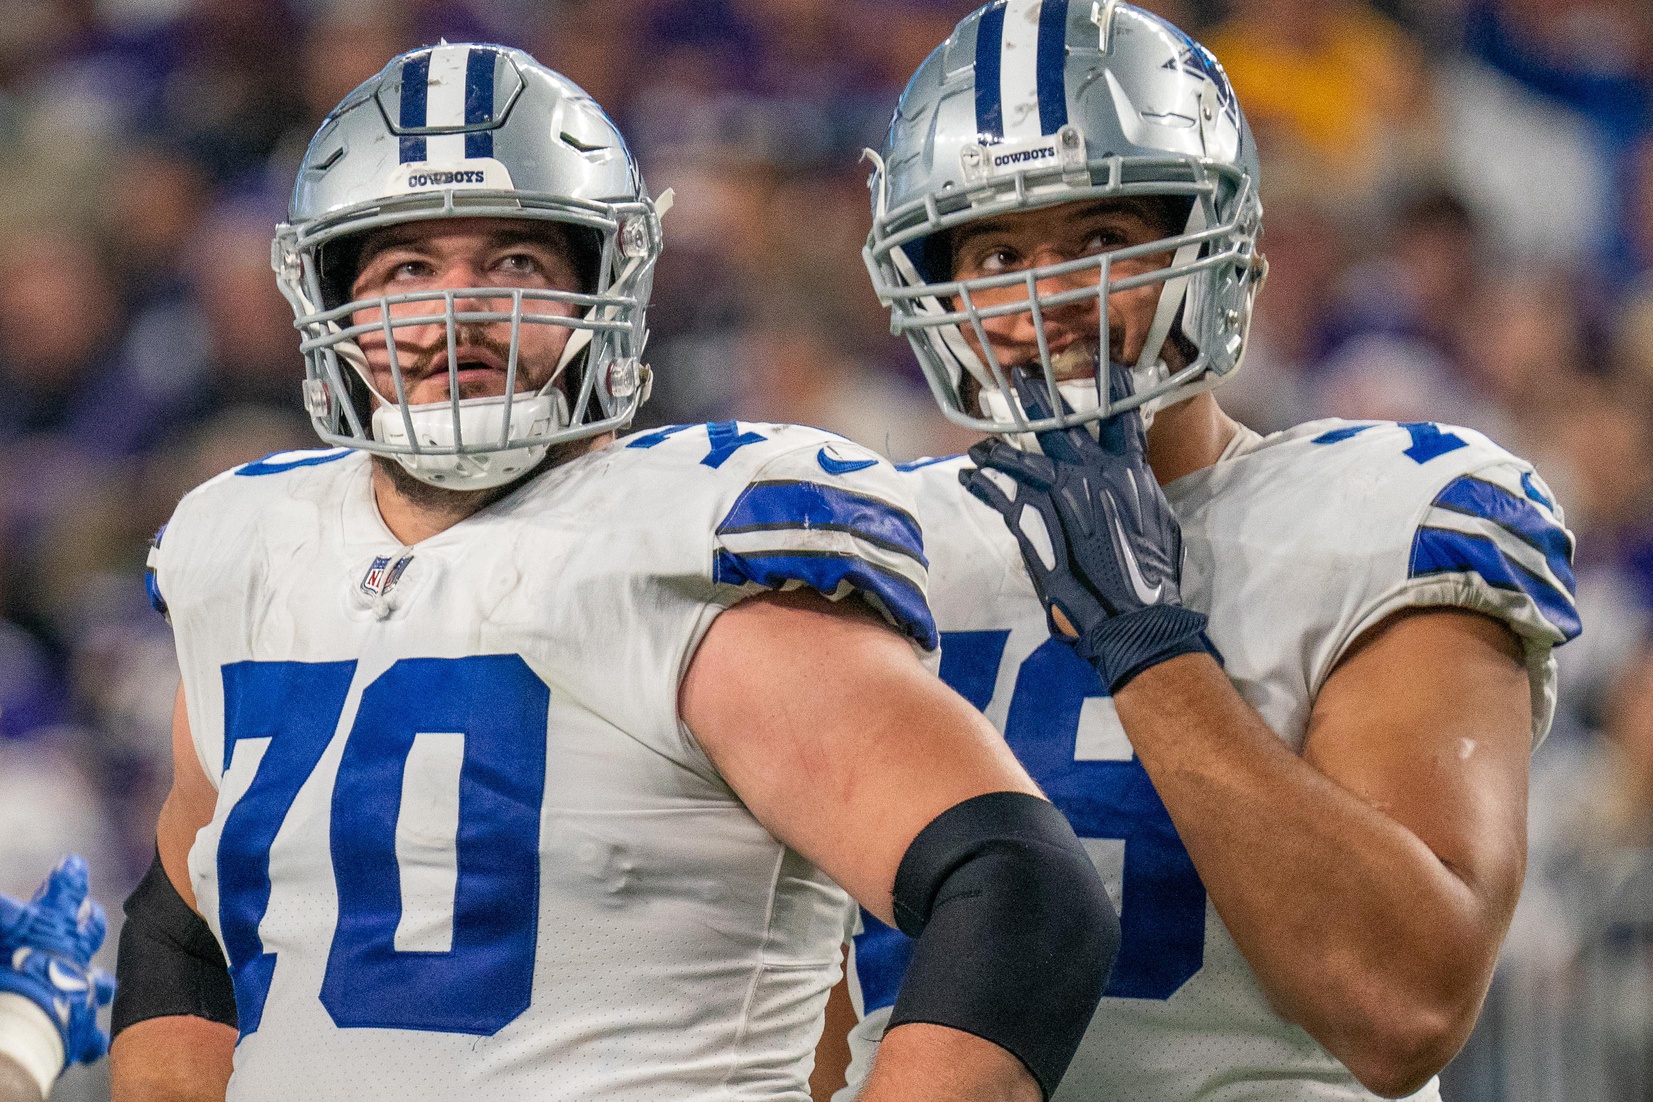 Cowboys' Mike McCarthy gives update on offensive line injuries ahead of  Giants game